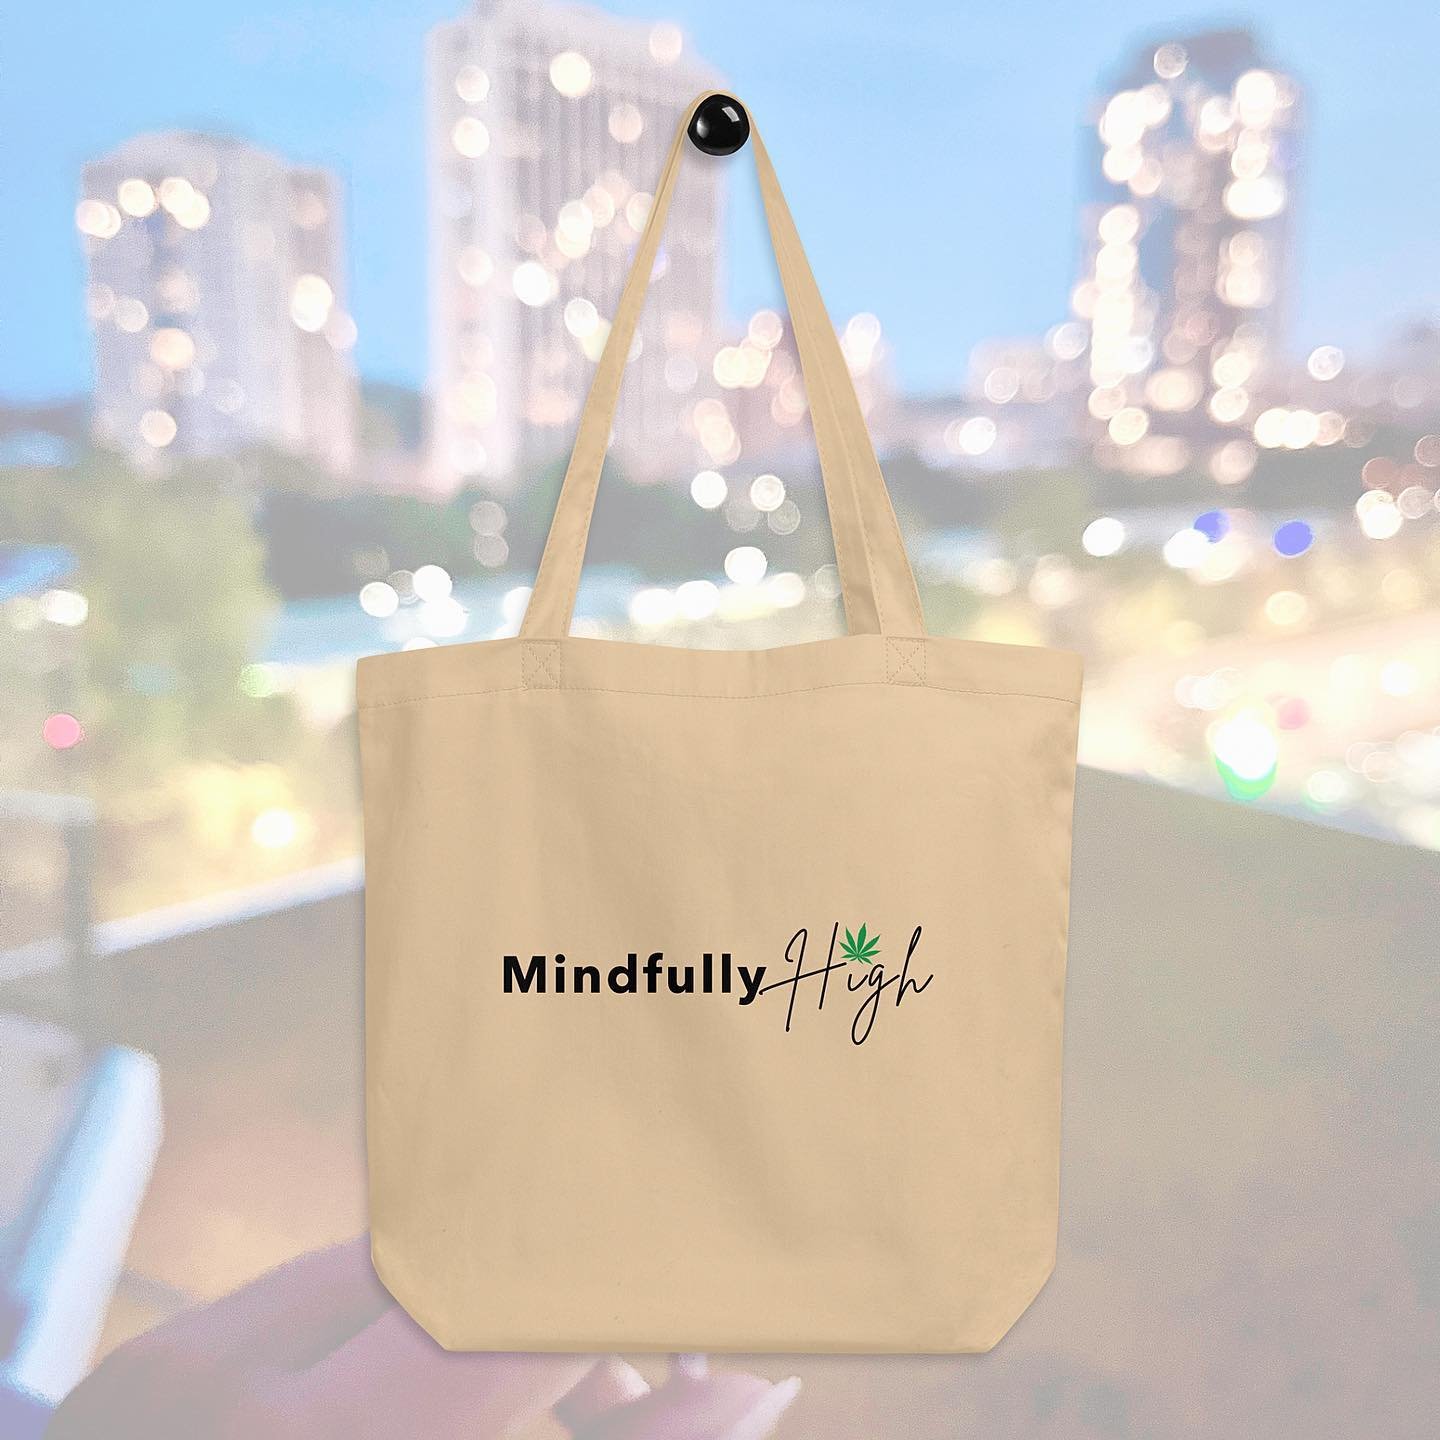 Take a piece of mindfulness with you wherever you go with our chic 'Mindfully High' totes. Perfect for any part of your day. ✨🌿 #MindfulHighs #ToteallyMindful